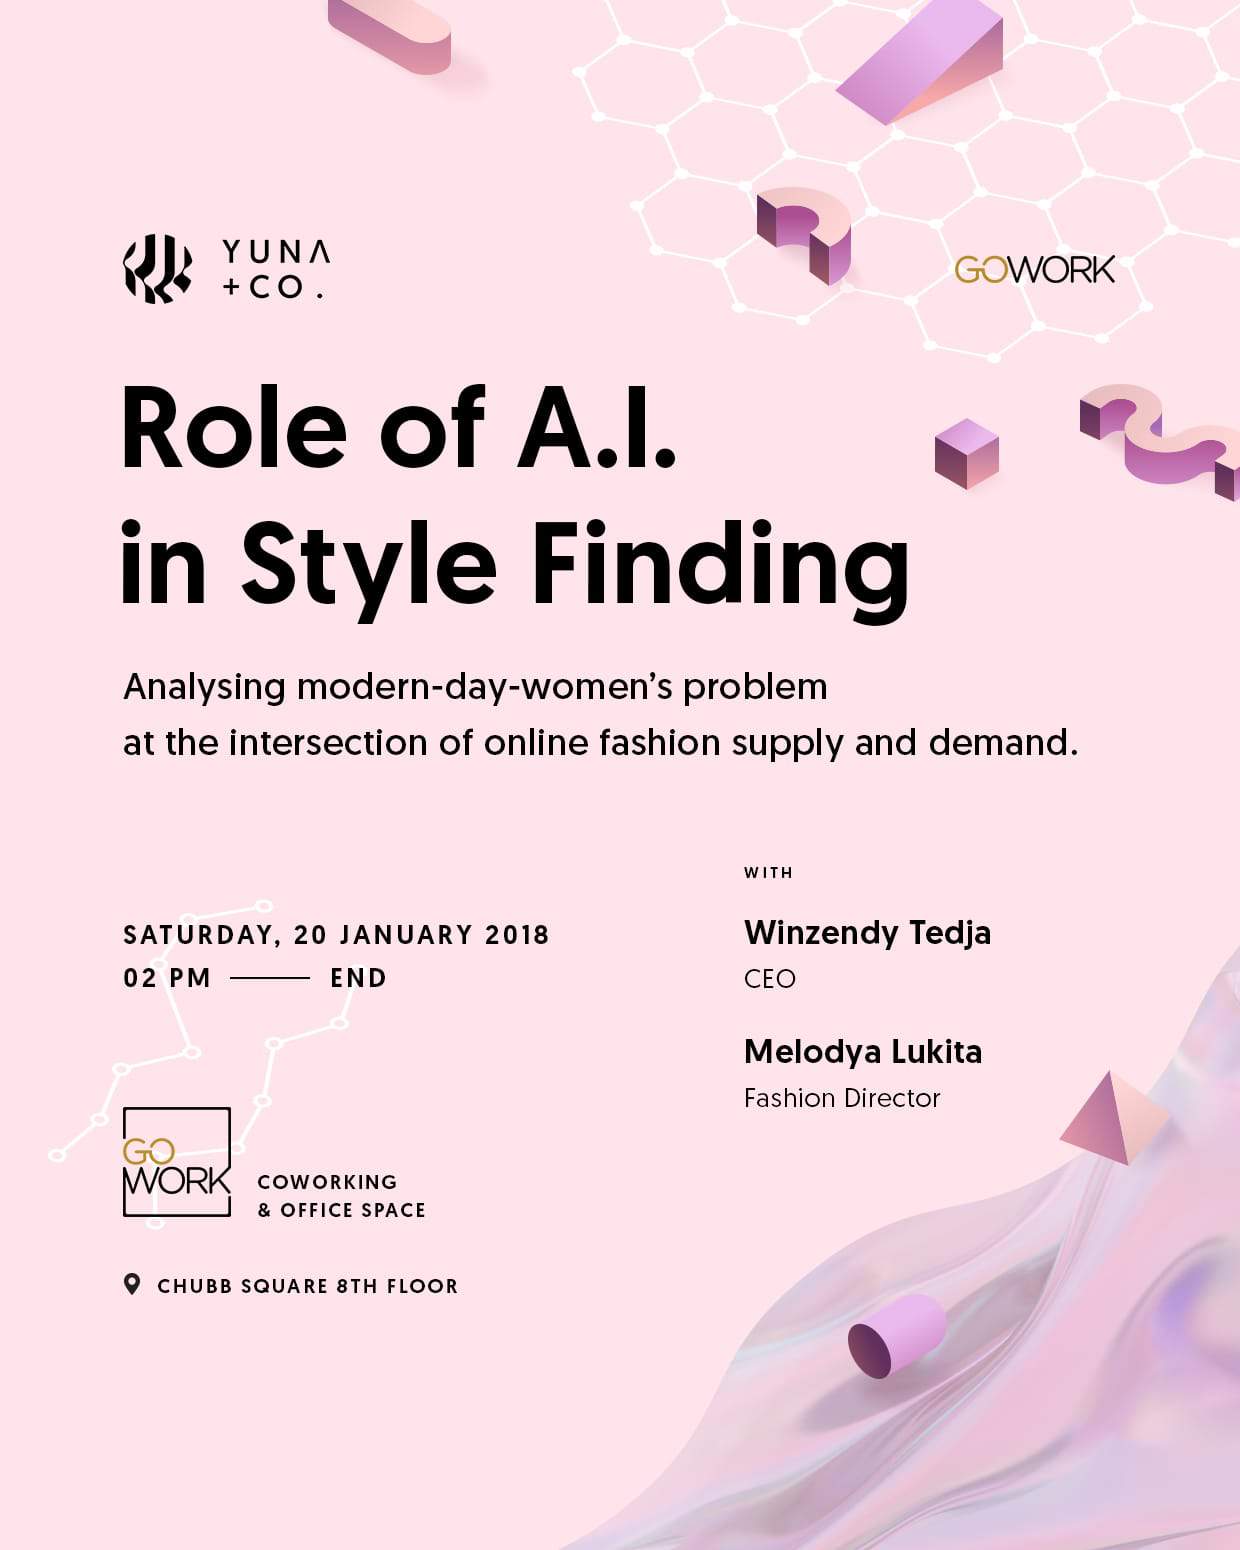 GoWork x Yuna + Co – Role of A.I in Style Finding (20 January 2018)